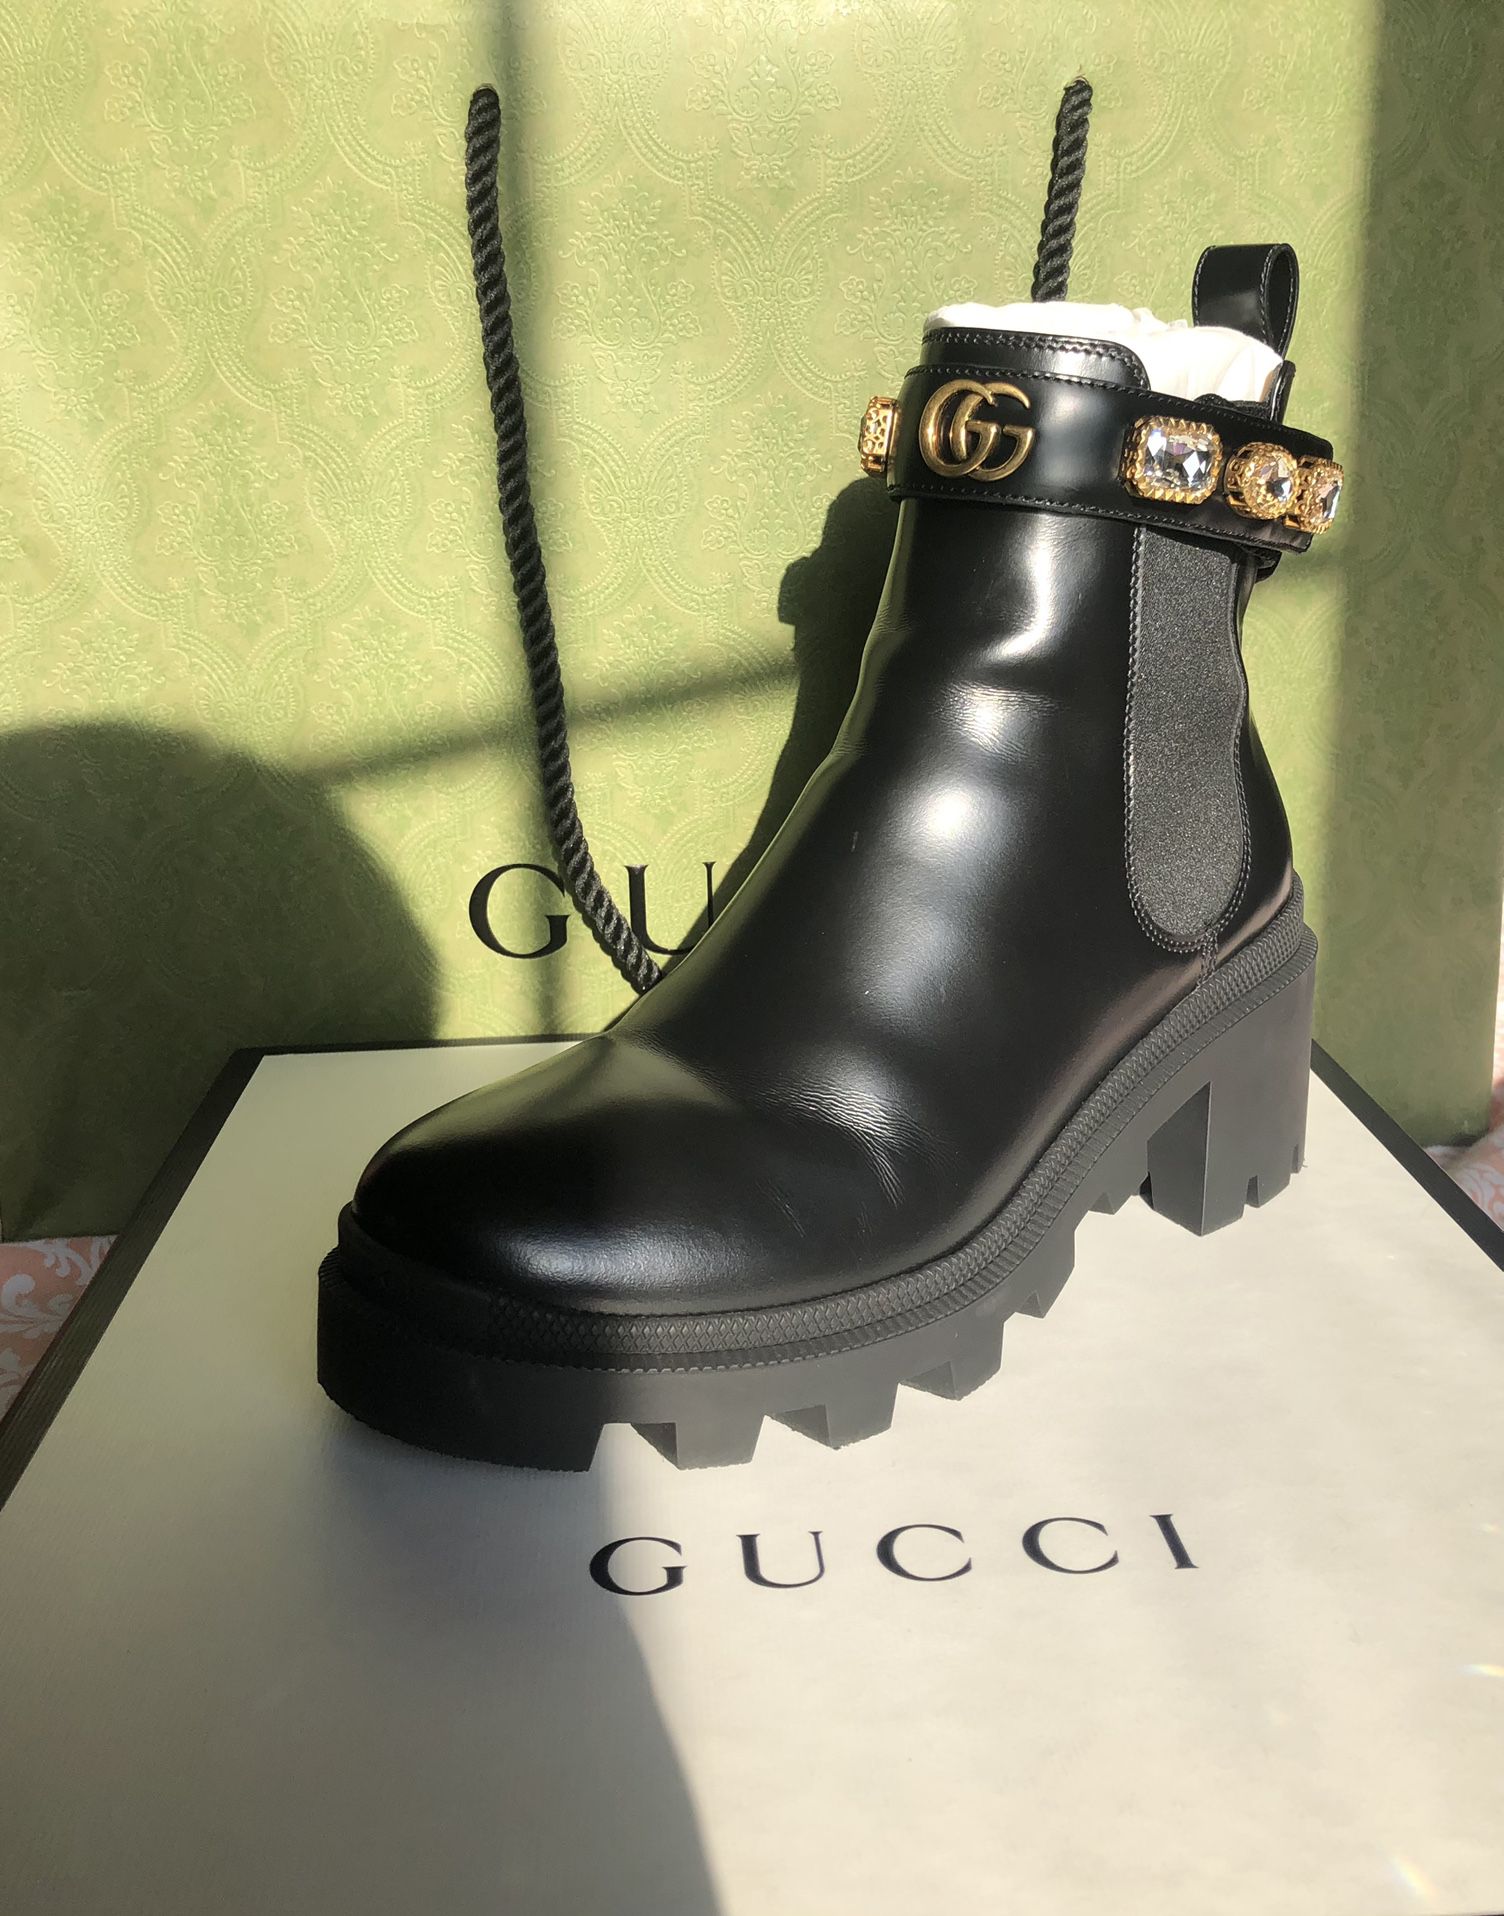 Gucci Leather Boots Ankle Strap for Sale in Manteca, CA - OfferUp